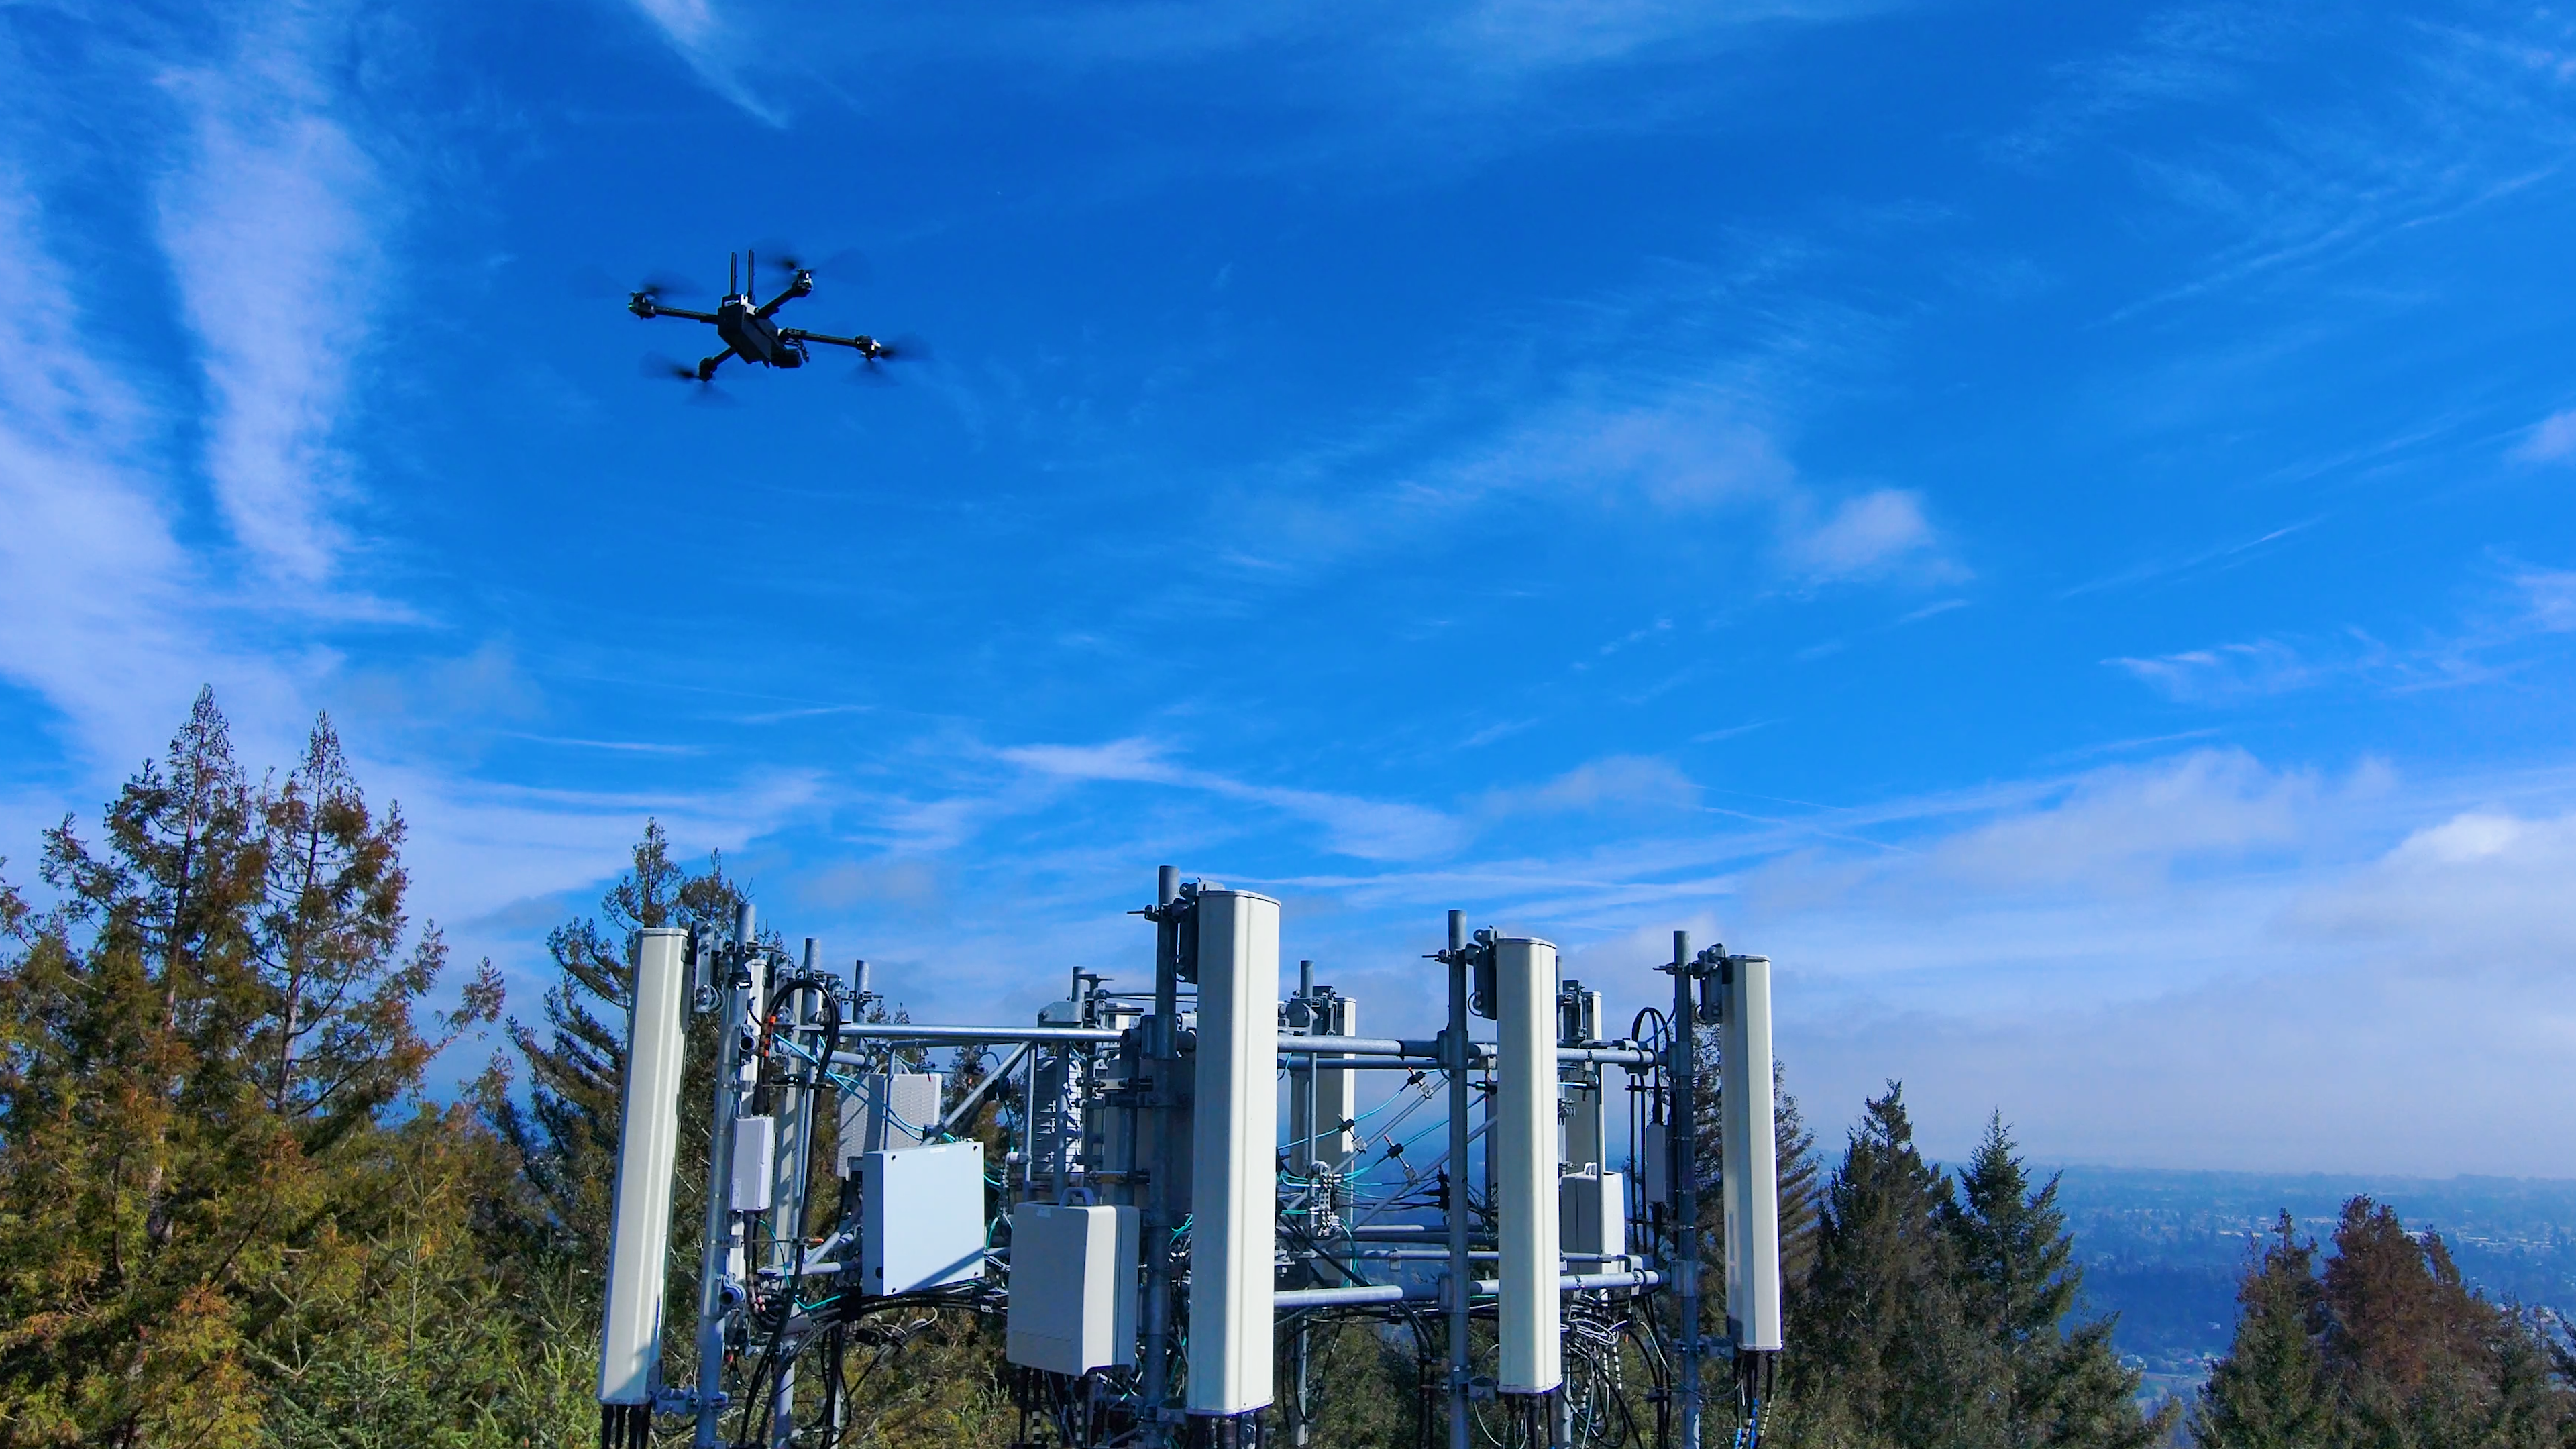 Drones cell and telecommunication tower | Skydio